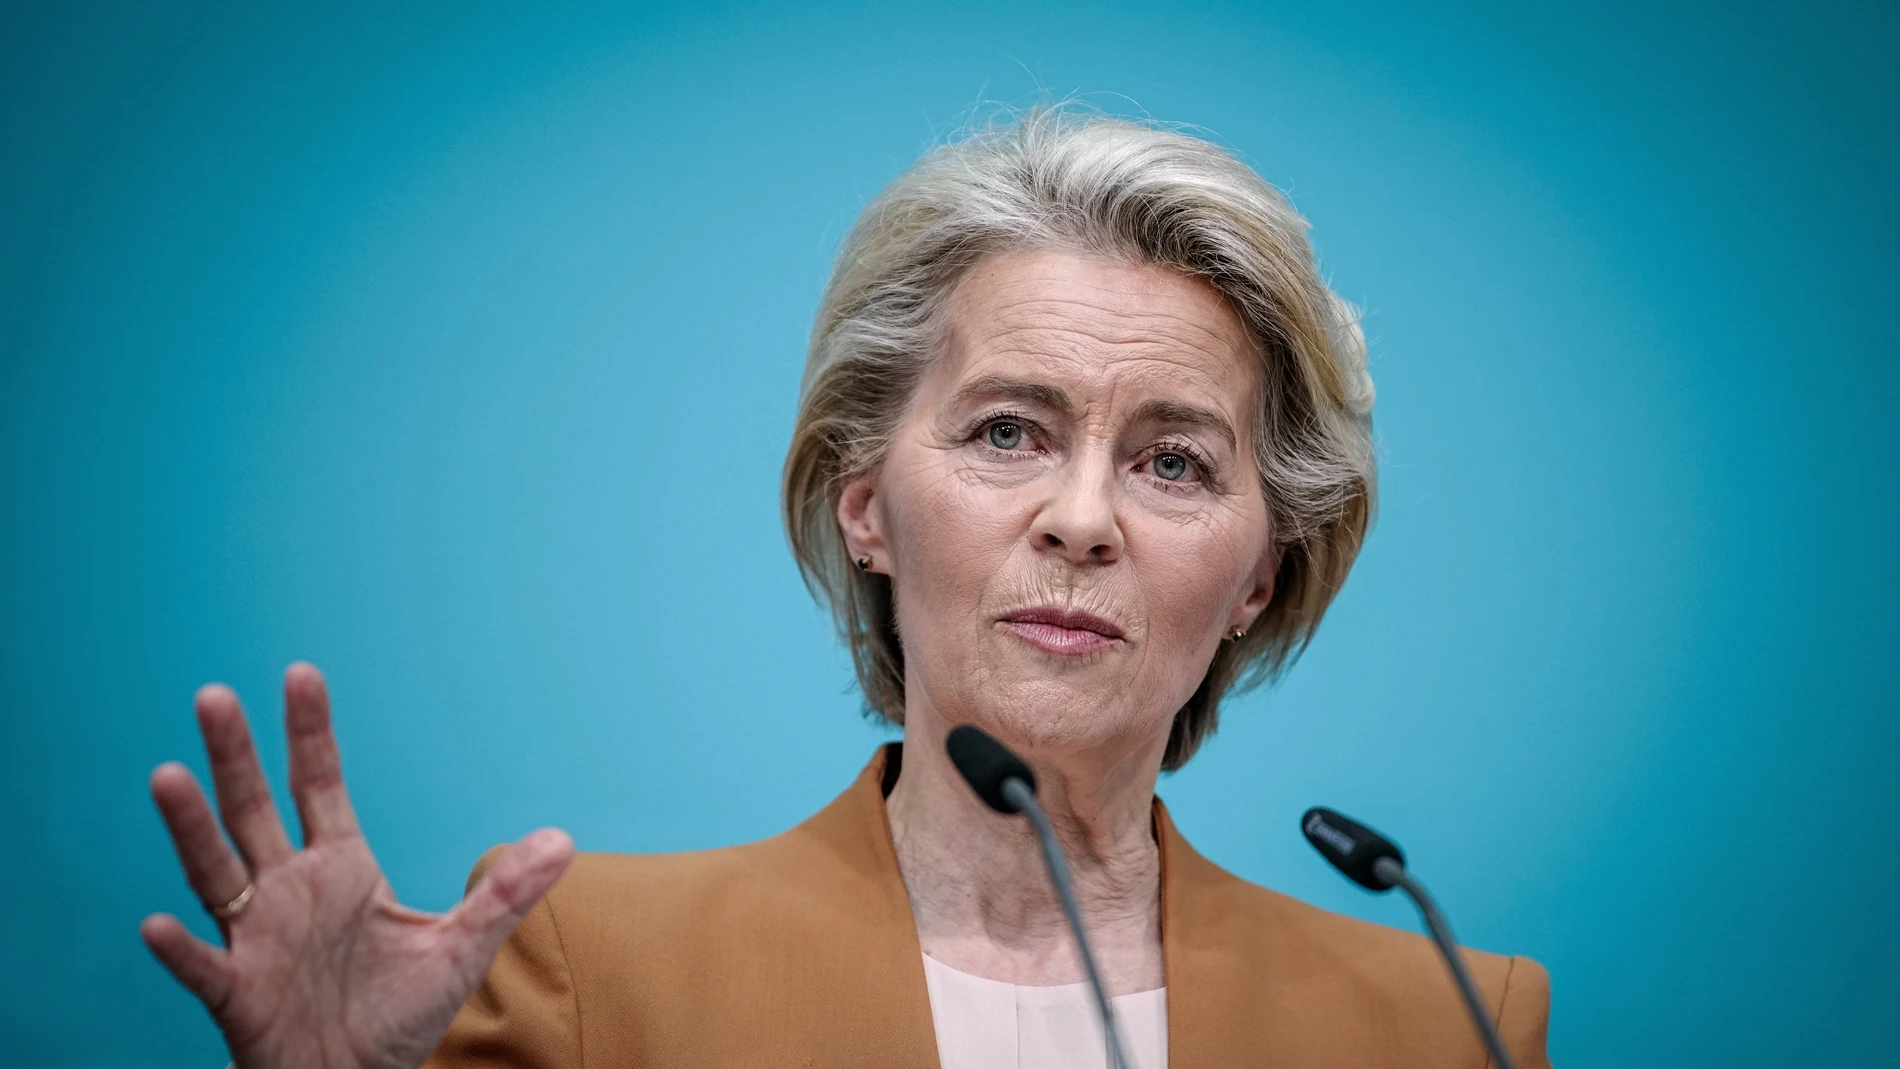 19 February 2024, Berlin: Ursula von der Leyen, President of the European Commission, gives a press conference after the CDU Federal Executive Committee meeting. Von der Leyen is running for a second term as President of the European Commission. Photo: Kay Nietfeld/dpa 19/02/2024 ONLY FOR USE IN SPAIN